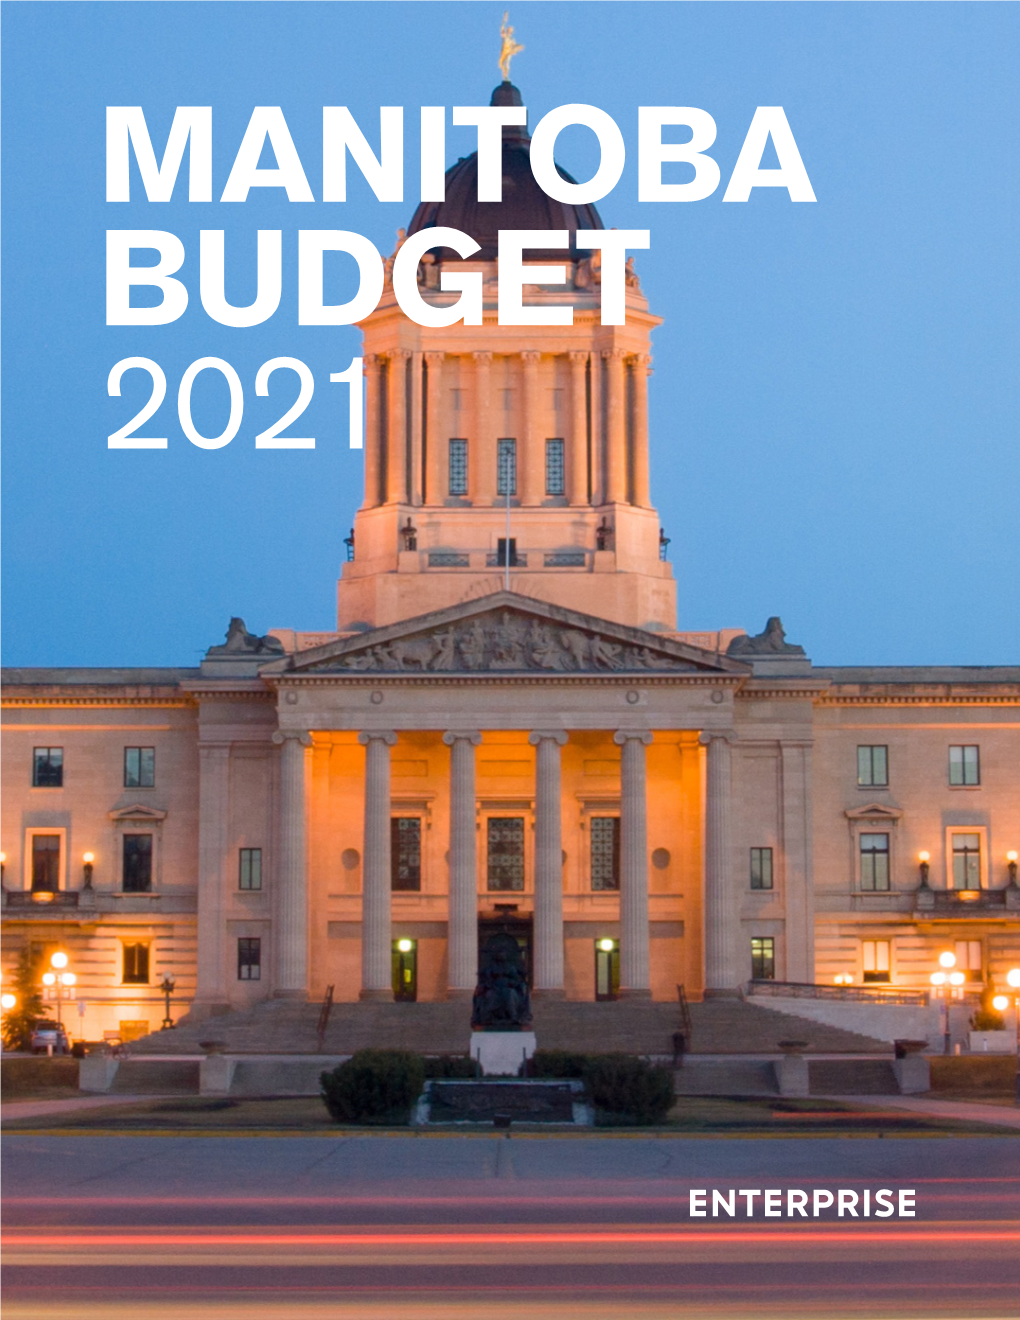 MANITOBA BUDGET 2021 Overview: New Department of Mental Health, Wellness and Recovery